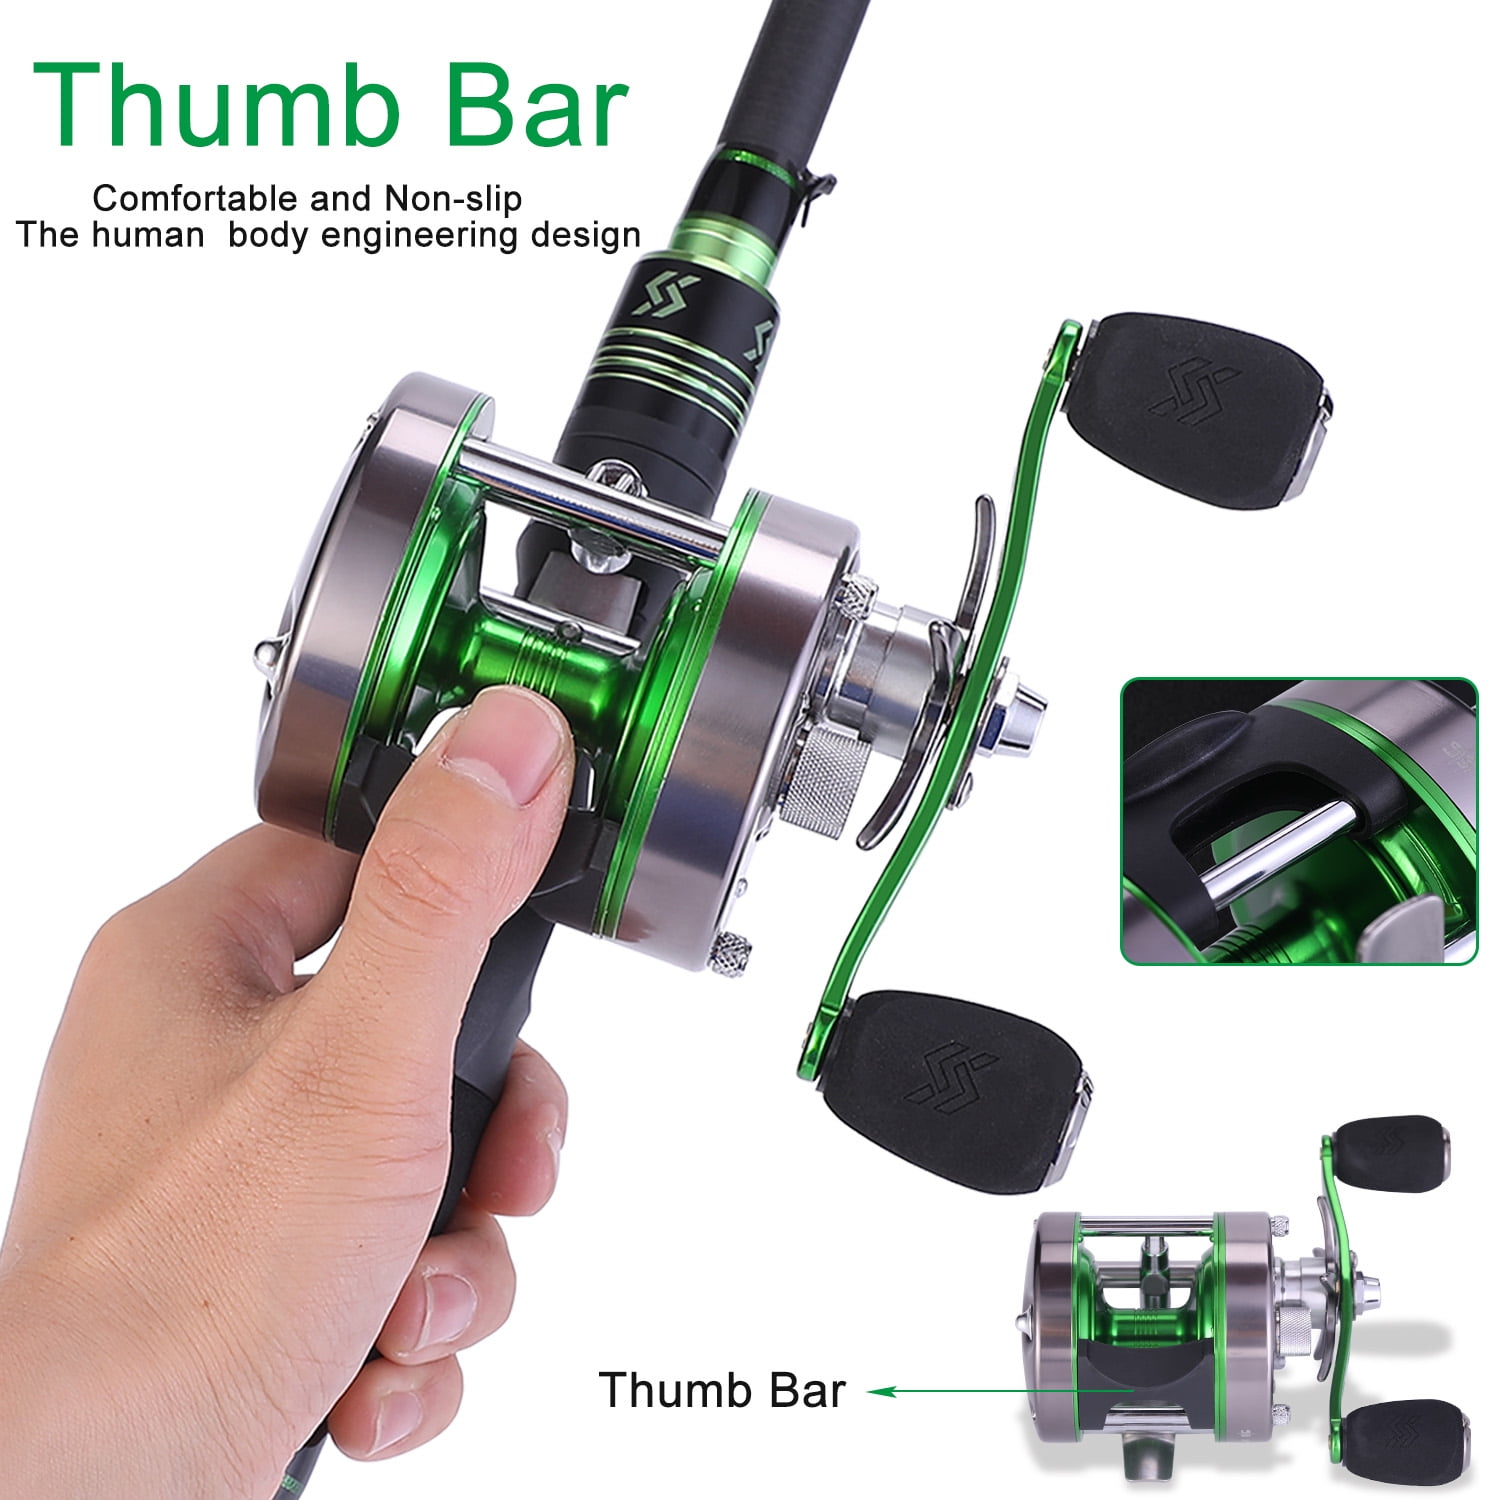 Sougayilang Round Baitcasting Reel Saltwater Fishing Reinforced Metal for Catfish Salmon Bass Reel, Size: XLT600- Left Hand, Green